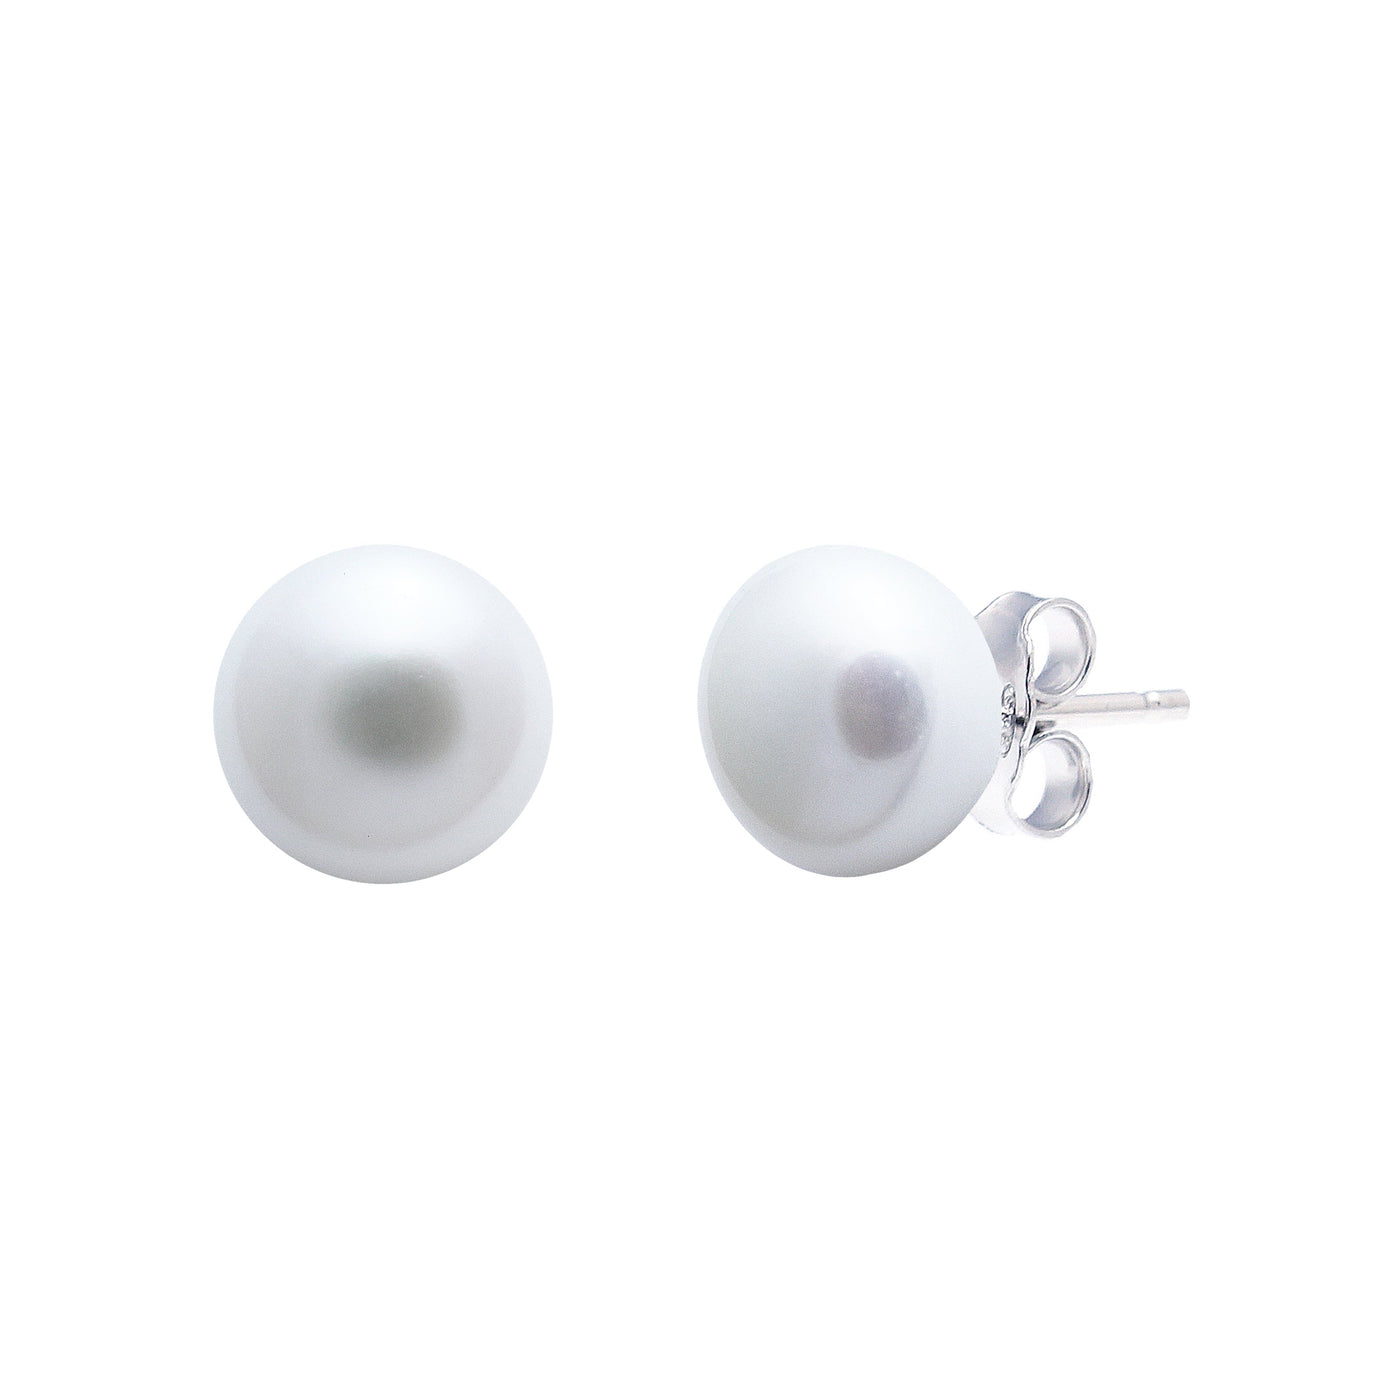 6-6.5mm White Button Freshwater Pearl Sterling Silver Stud Earrings